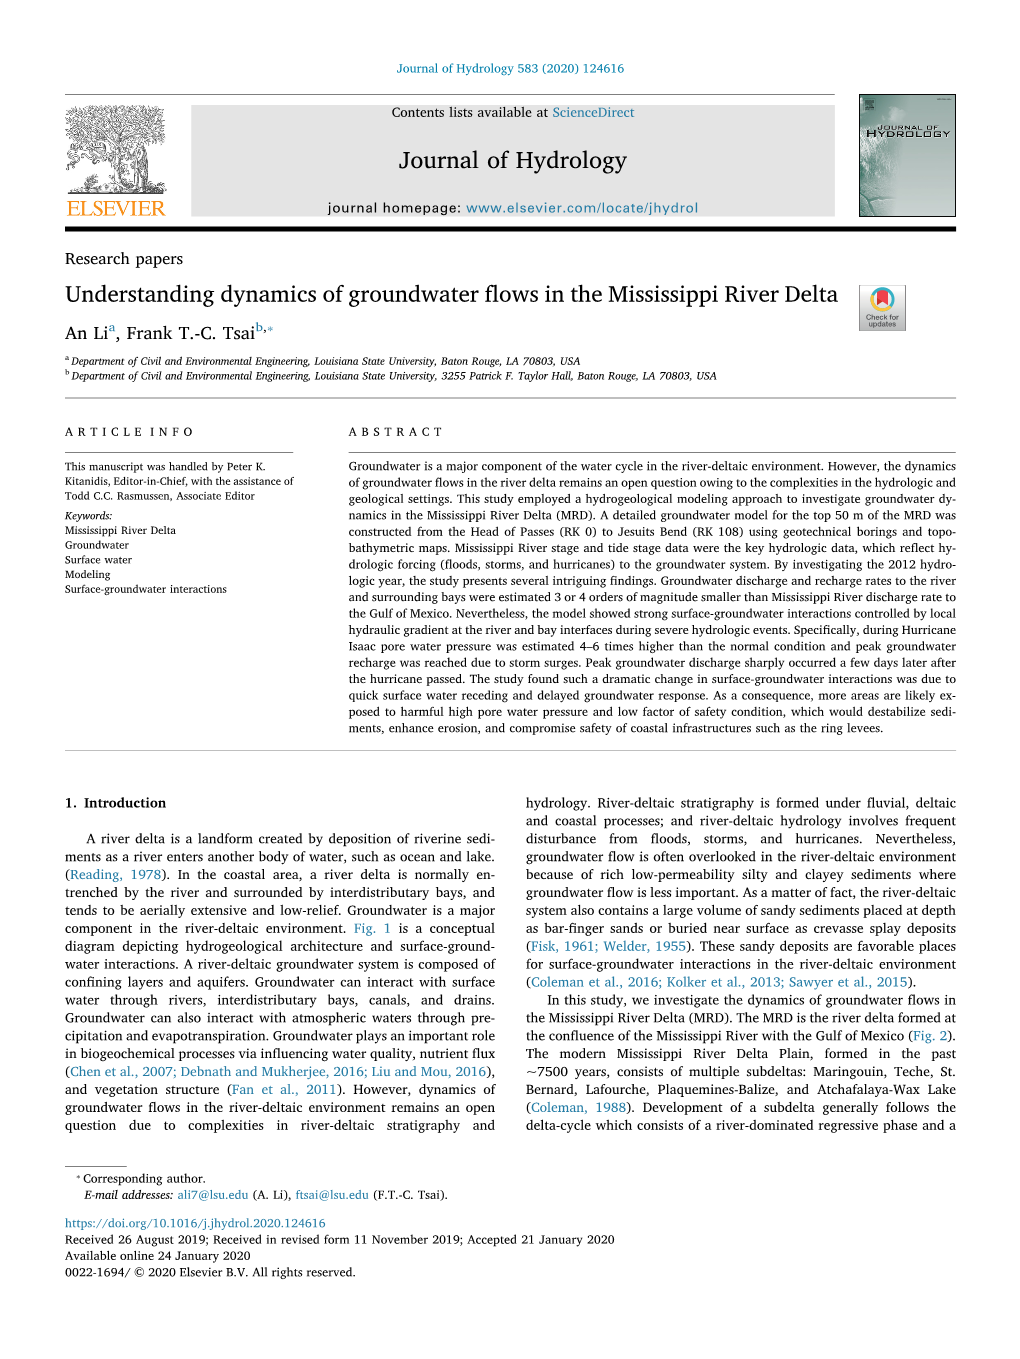 Understanding Dynamics of Groundwater Flows in The